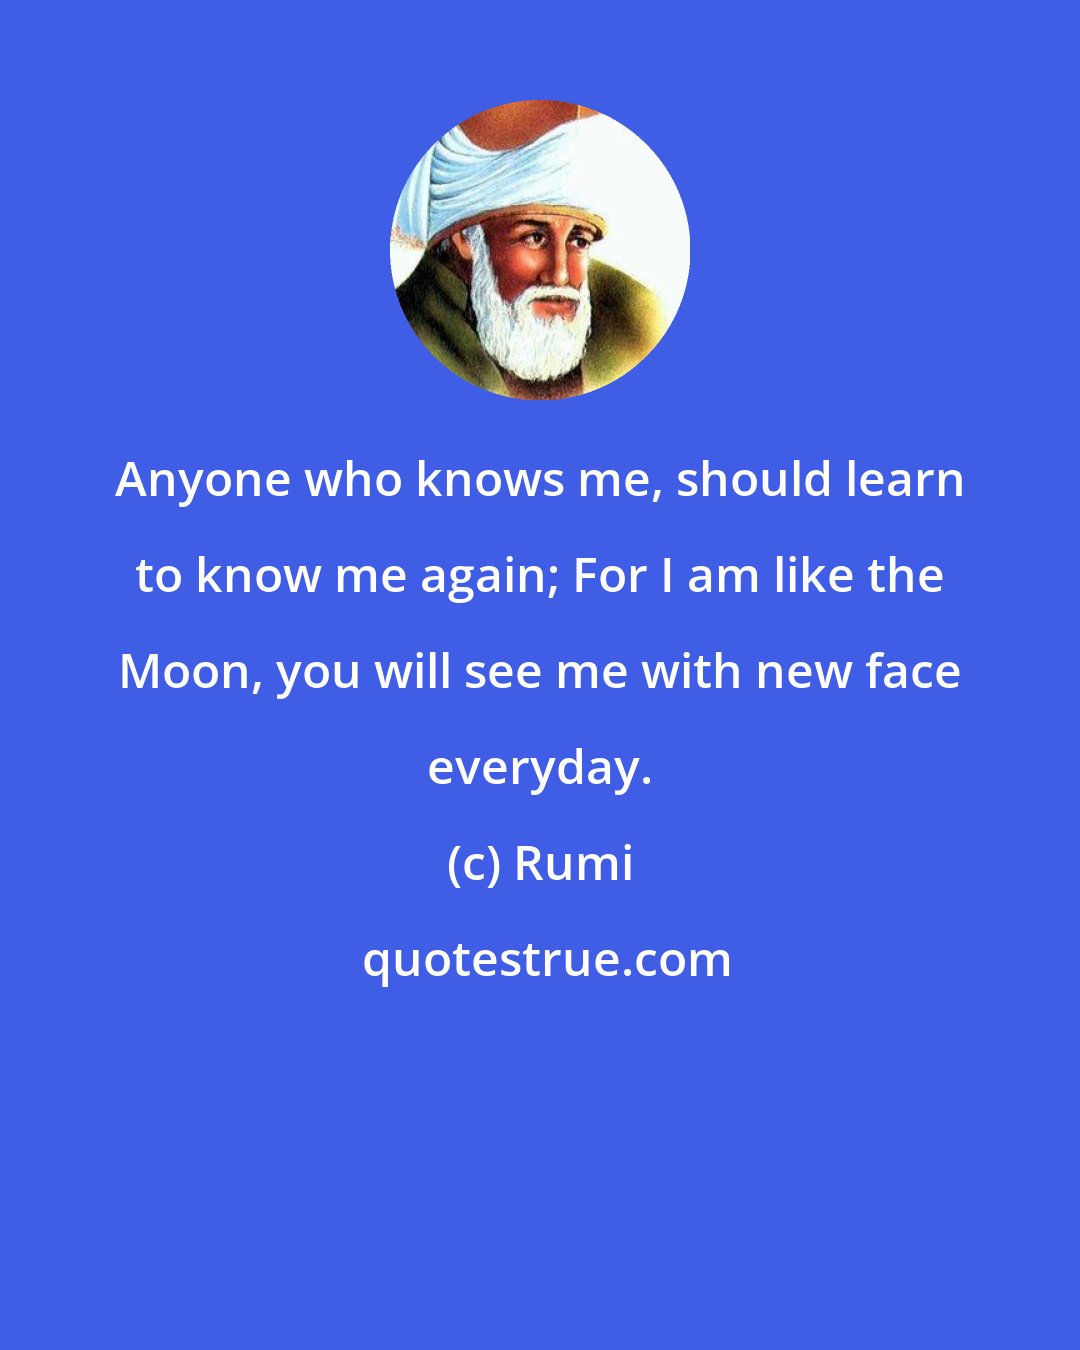 Rumi: Anyone who knows me, should learn to know me again; For I am like the Moon, you will see me with new face everyday.